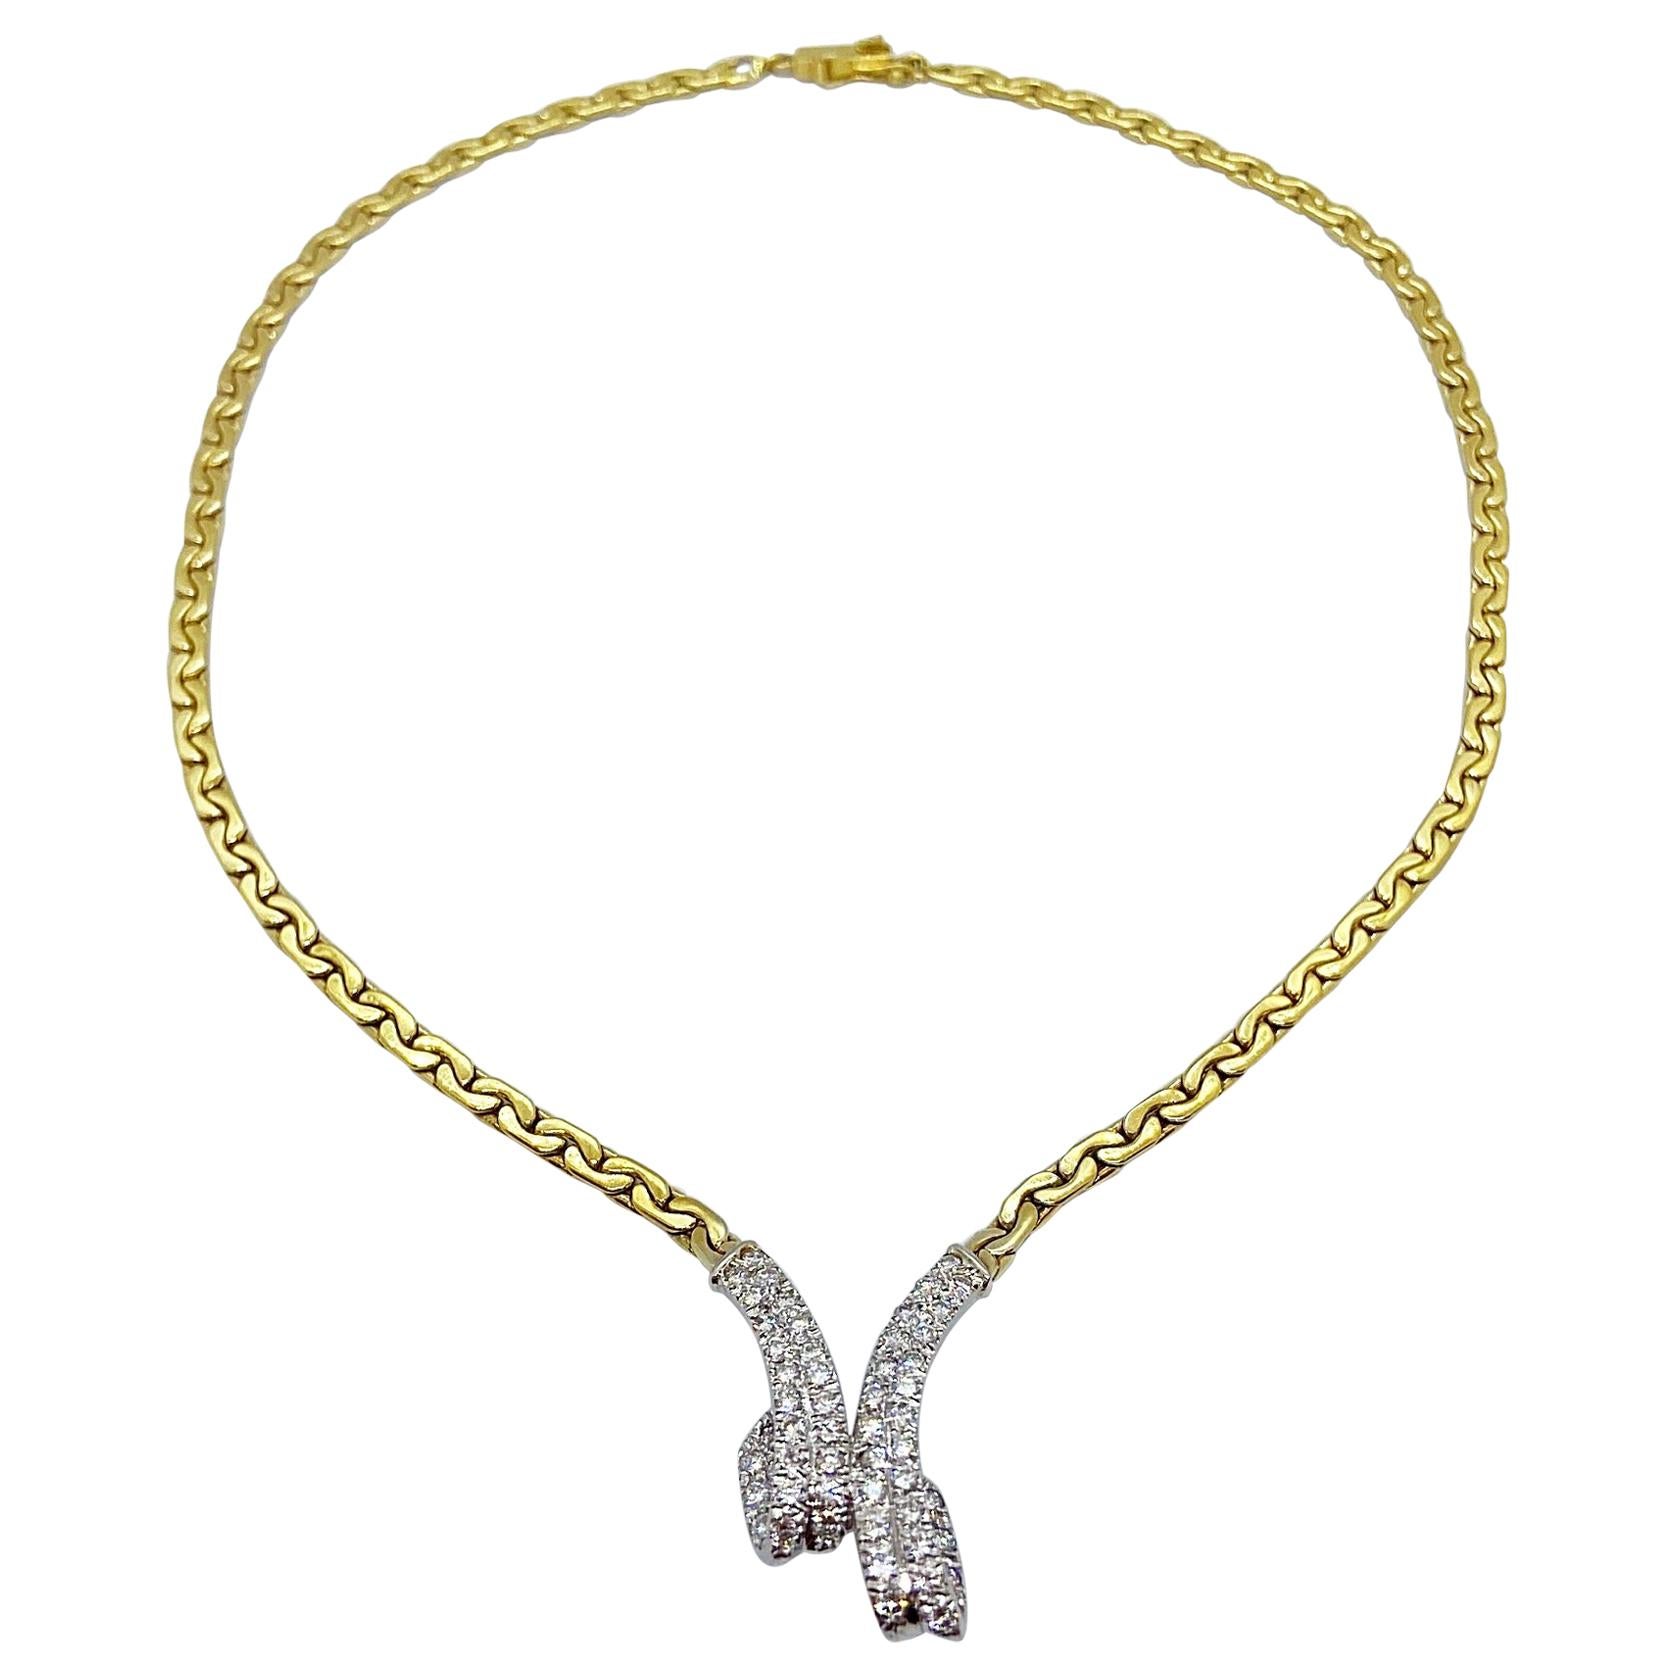 Vintage 14KT Yellow and White Gold Necklace with 1.20 Ct. Diamond Ribbon Center